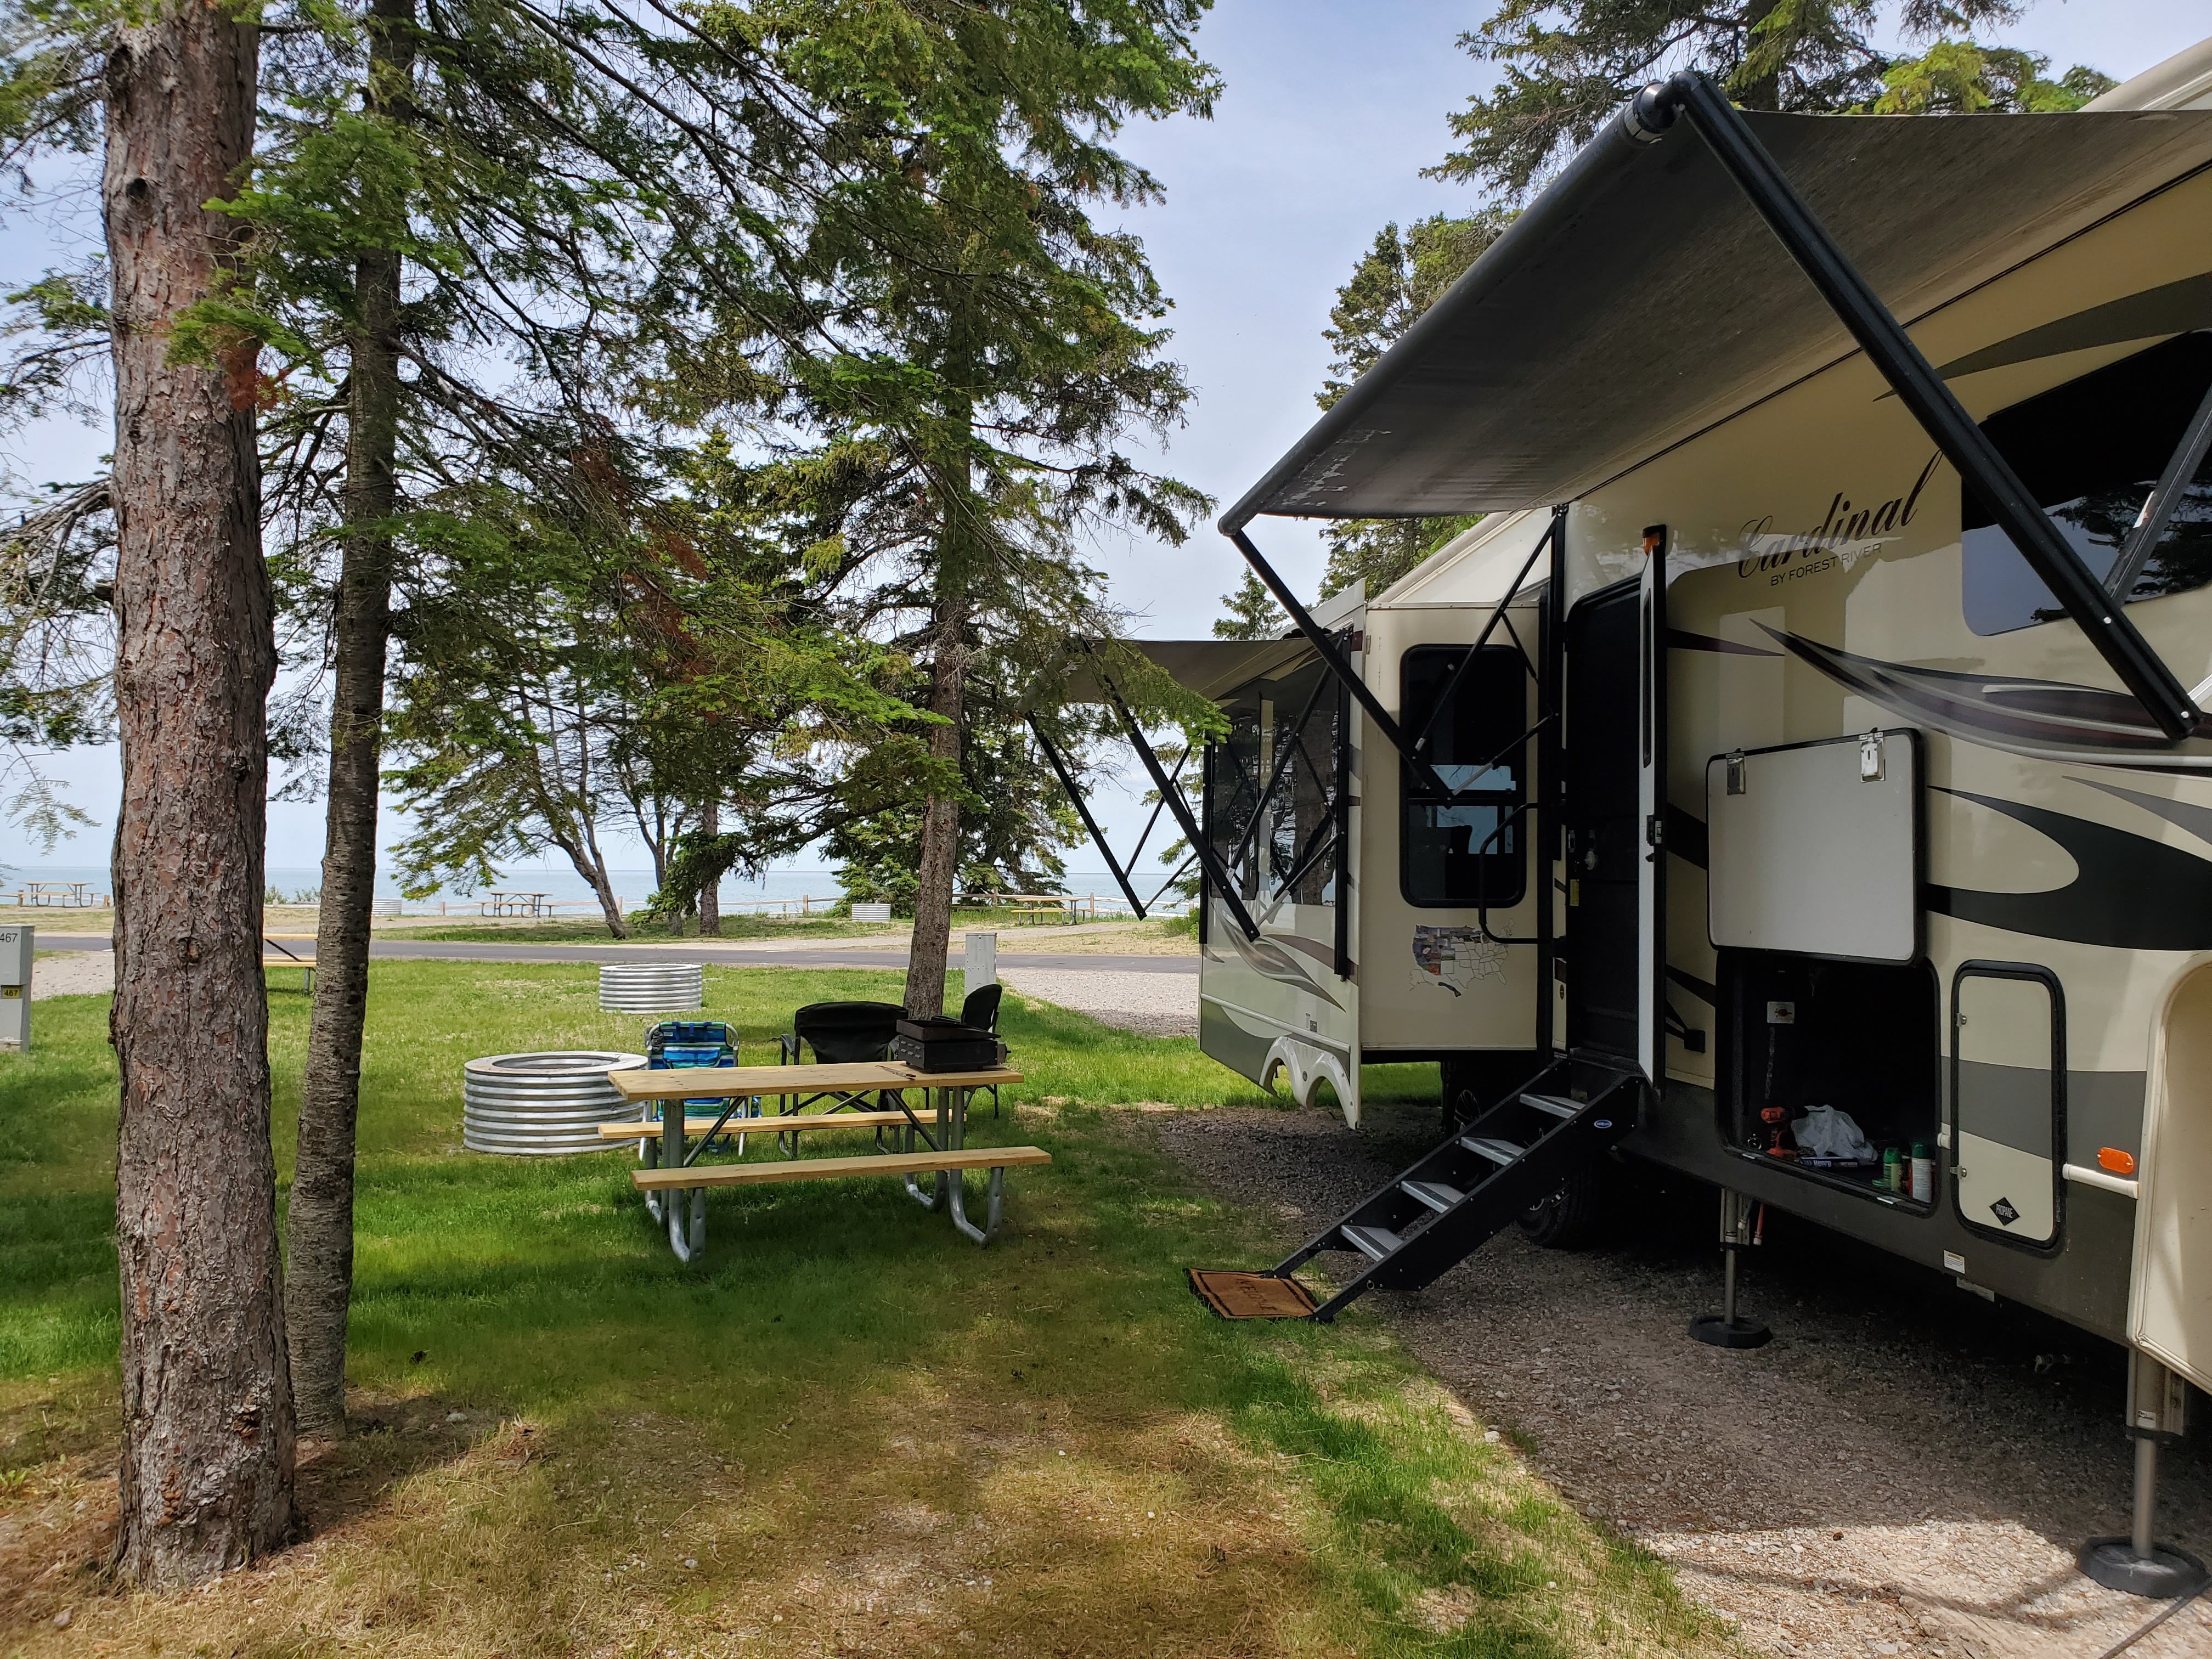 RV rental delivered to campsite for family RV camping trip